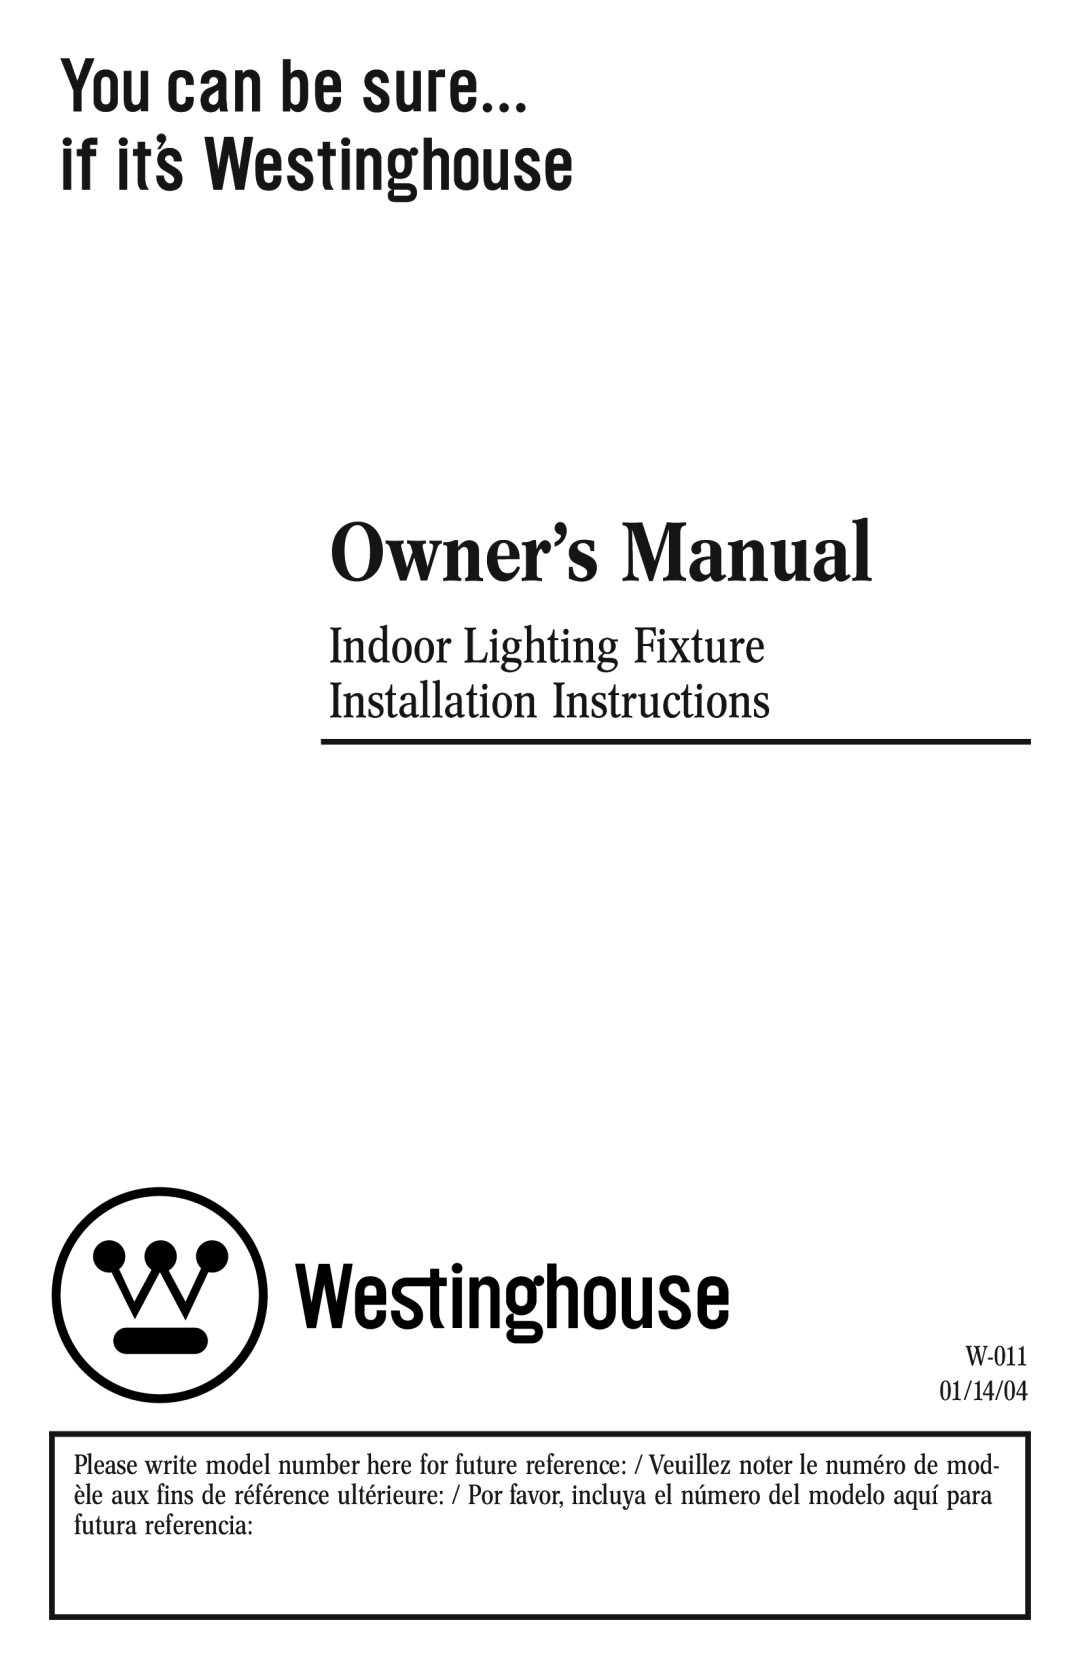 Westinghouse W-011 owner manual Indoor Lighting Fixture Installation Instructions 